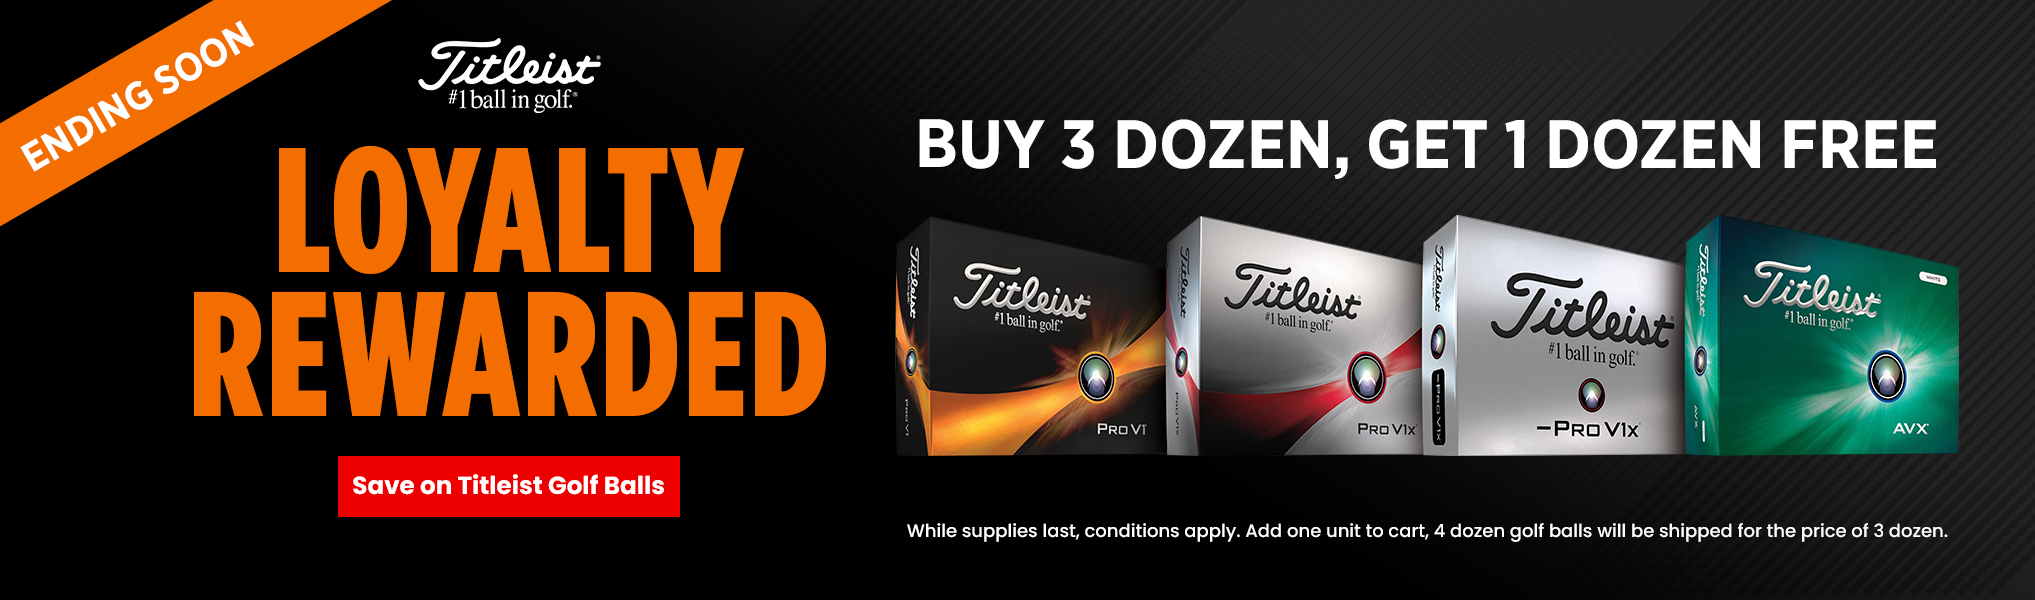 Titleist Loyalty Rewarded, Golf Ball Sale Save on Pro V1 and More